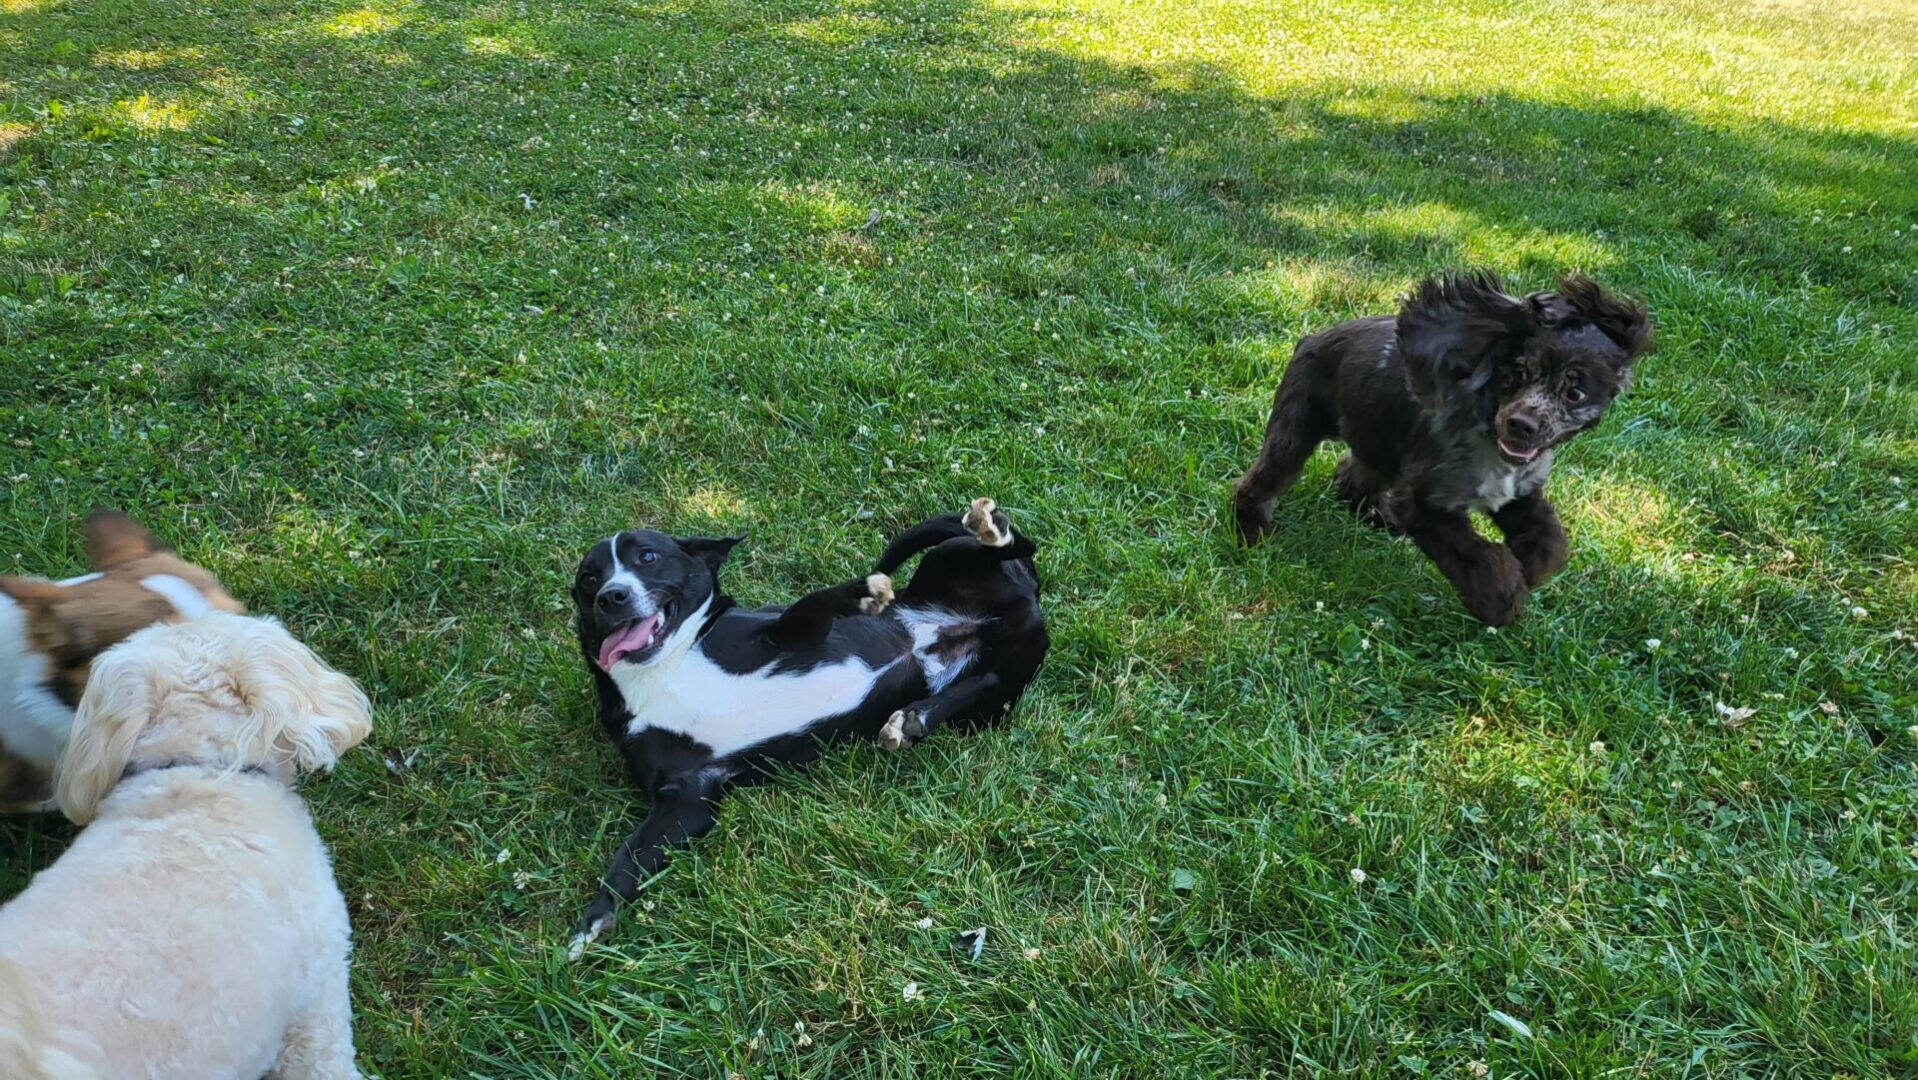 Dogs playing together